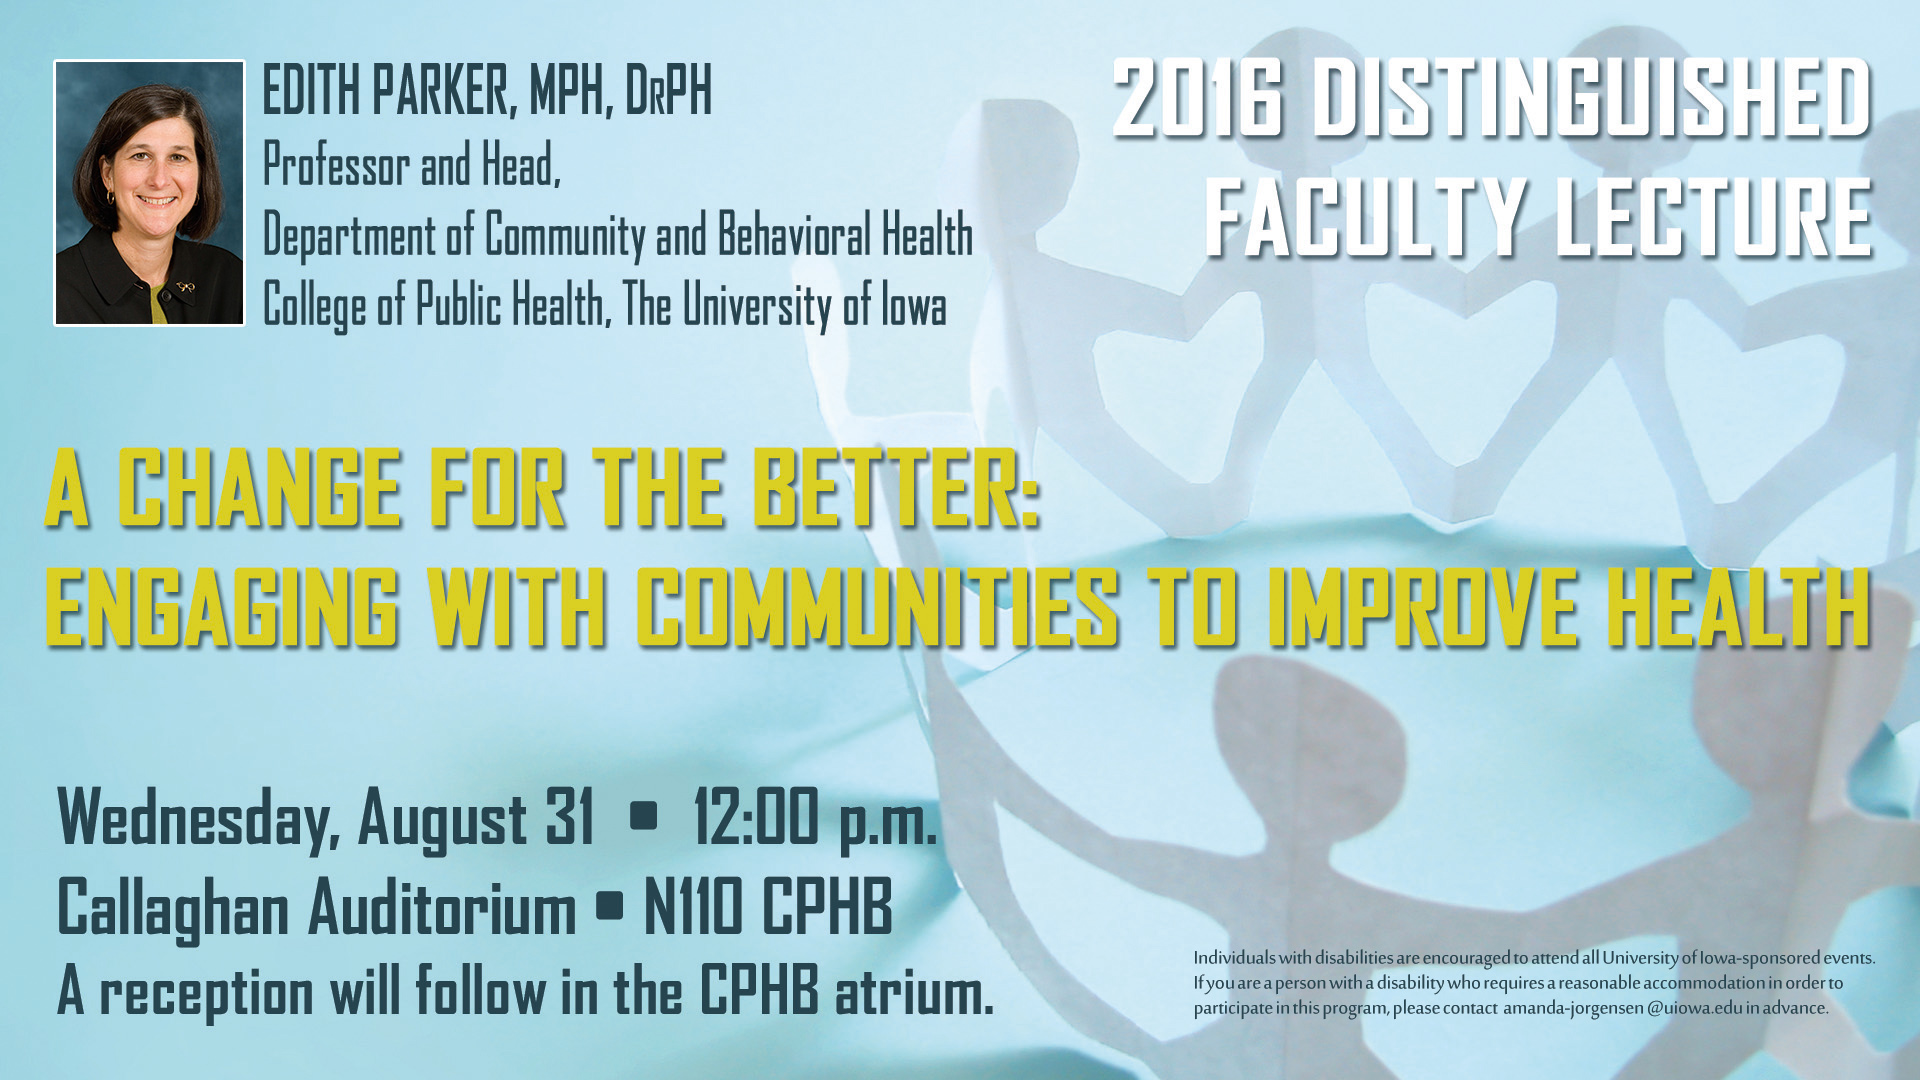 Edith Parker's College of Public Health Distinguished Faculty Lecture is Aug. 31